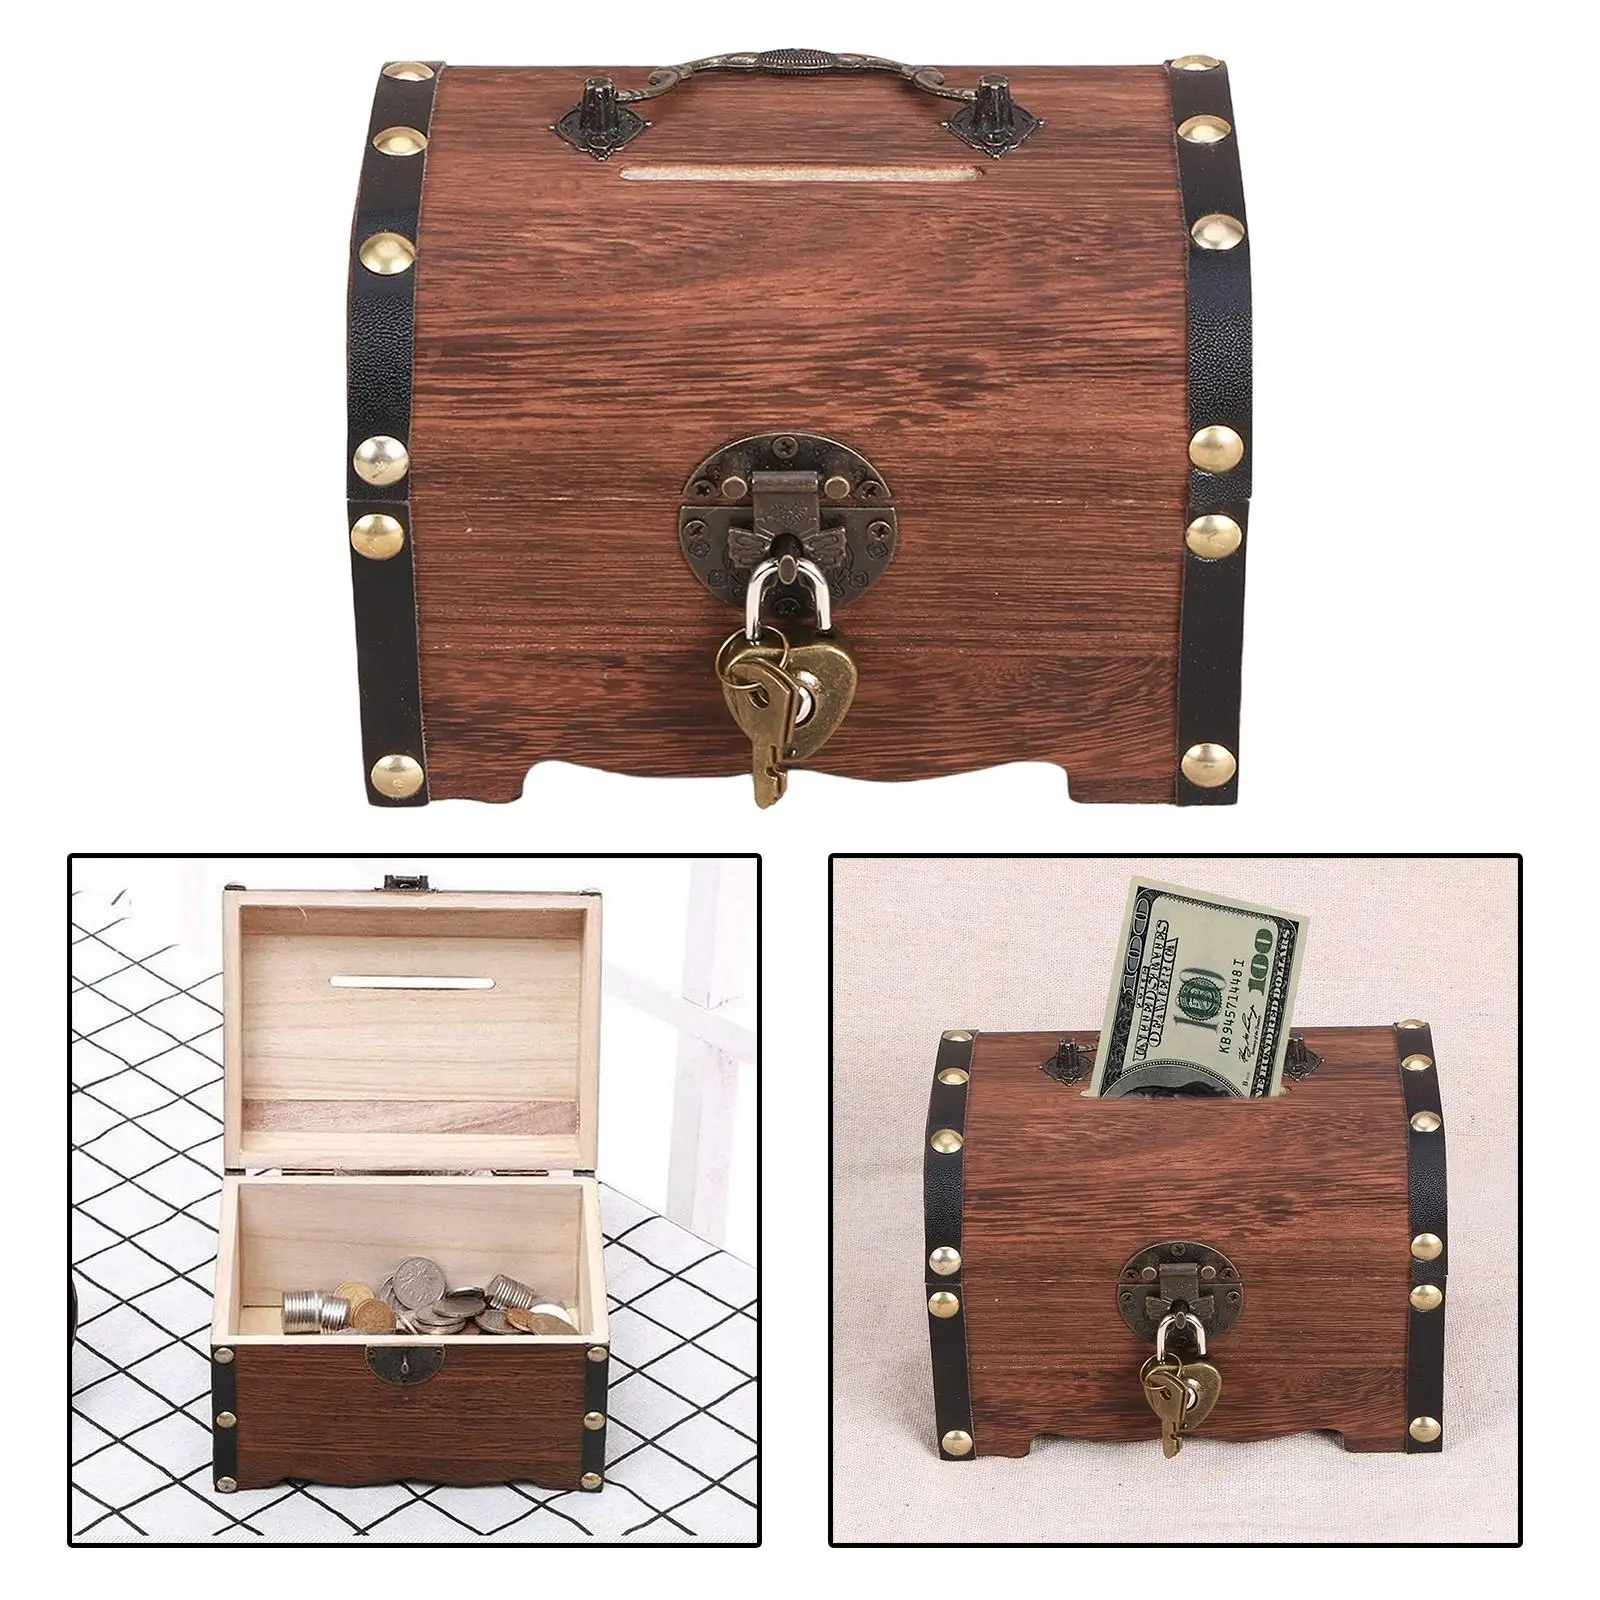 Retro Wooden Box, Vintage Wooden Vintage Coin Box Organizer with Lock & Keys for Children Adults